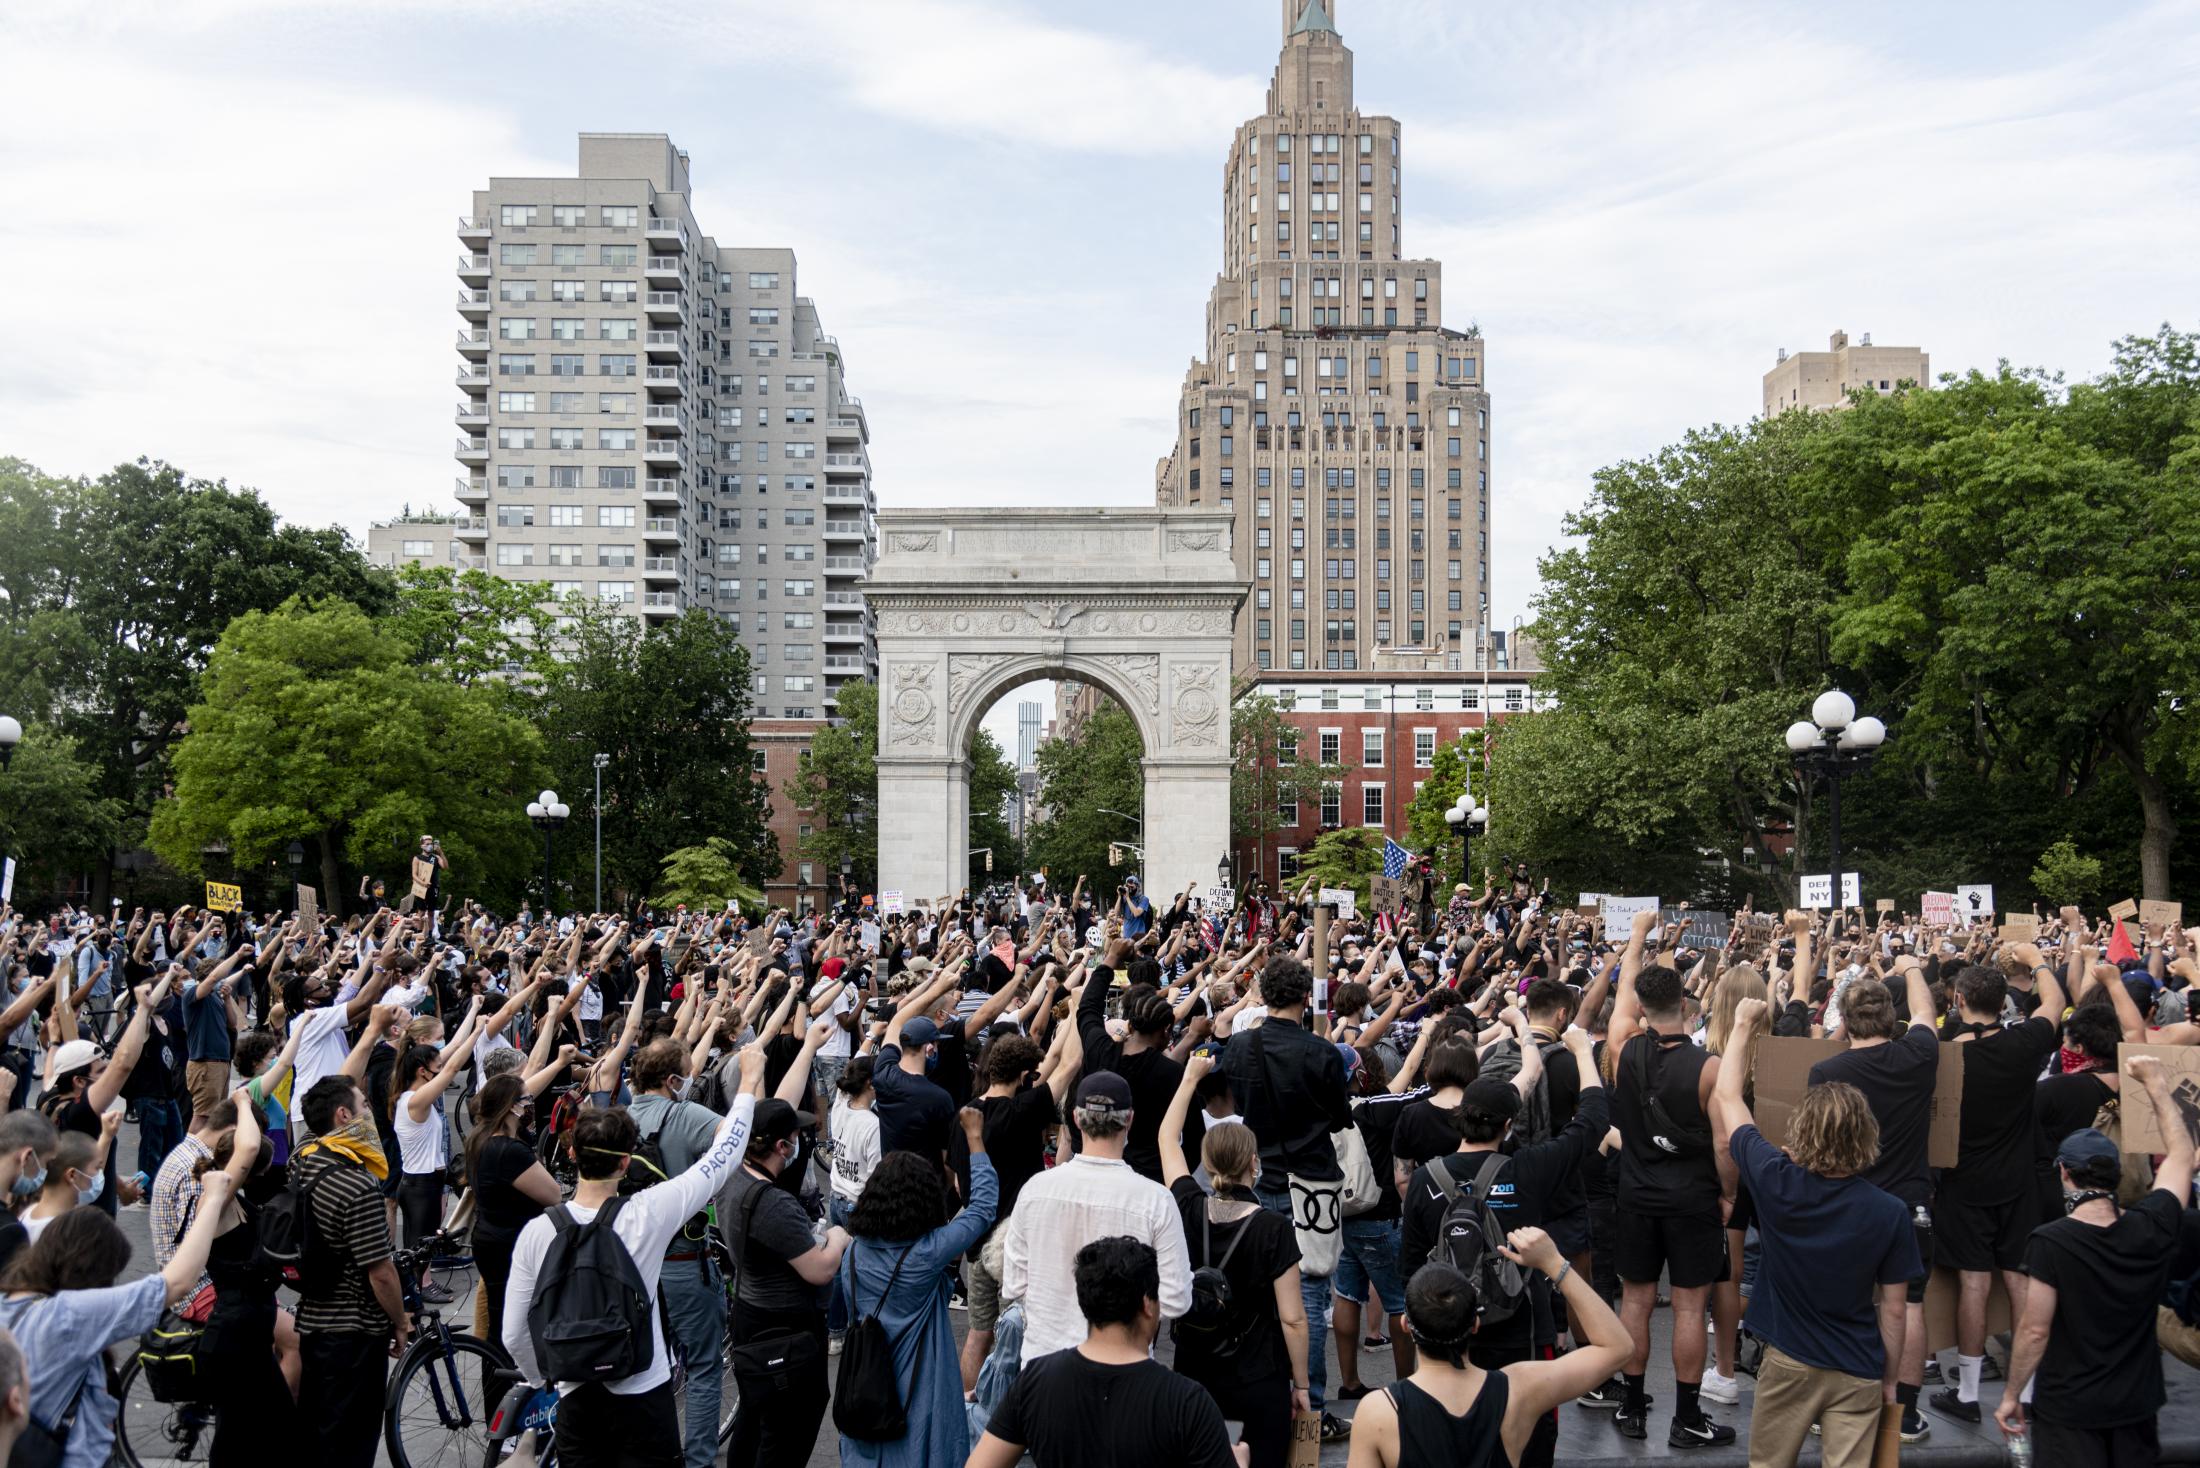 Hundreds of protesters chanting at the Washington Square Park arch in Manhattan. New York, September 2020.